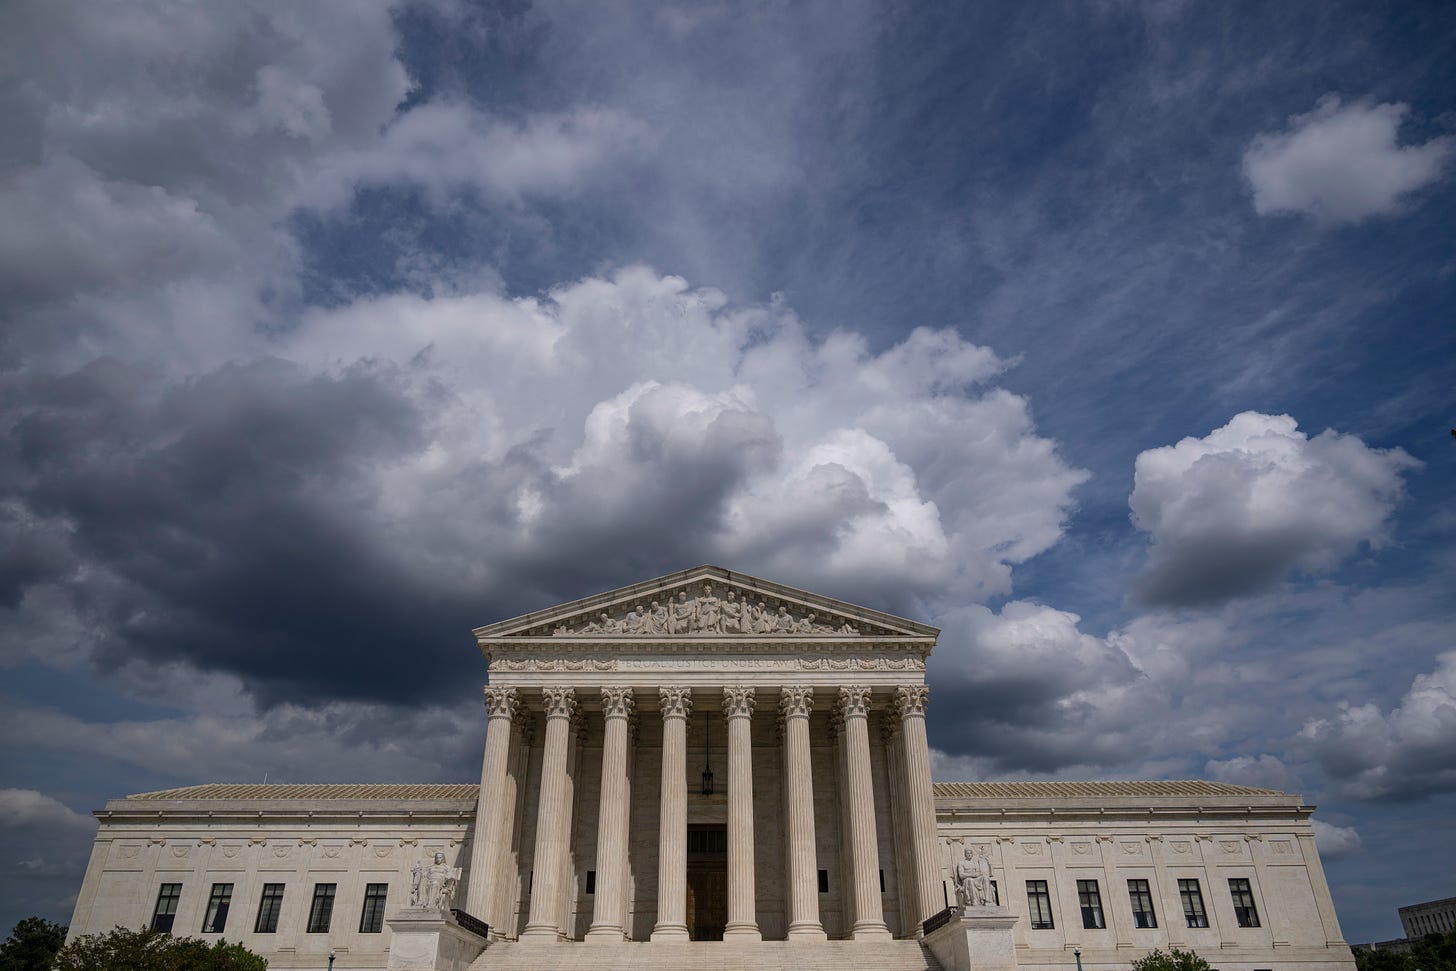 Clouds are seen above the U.S. Supreme Court building in Washington, D.C. 